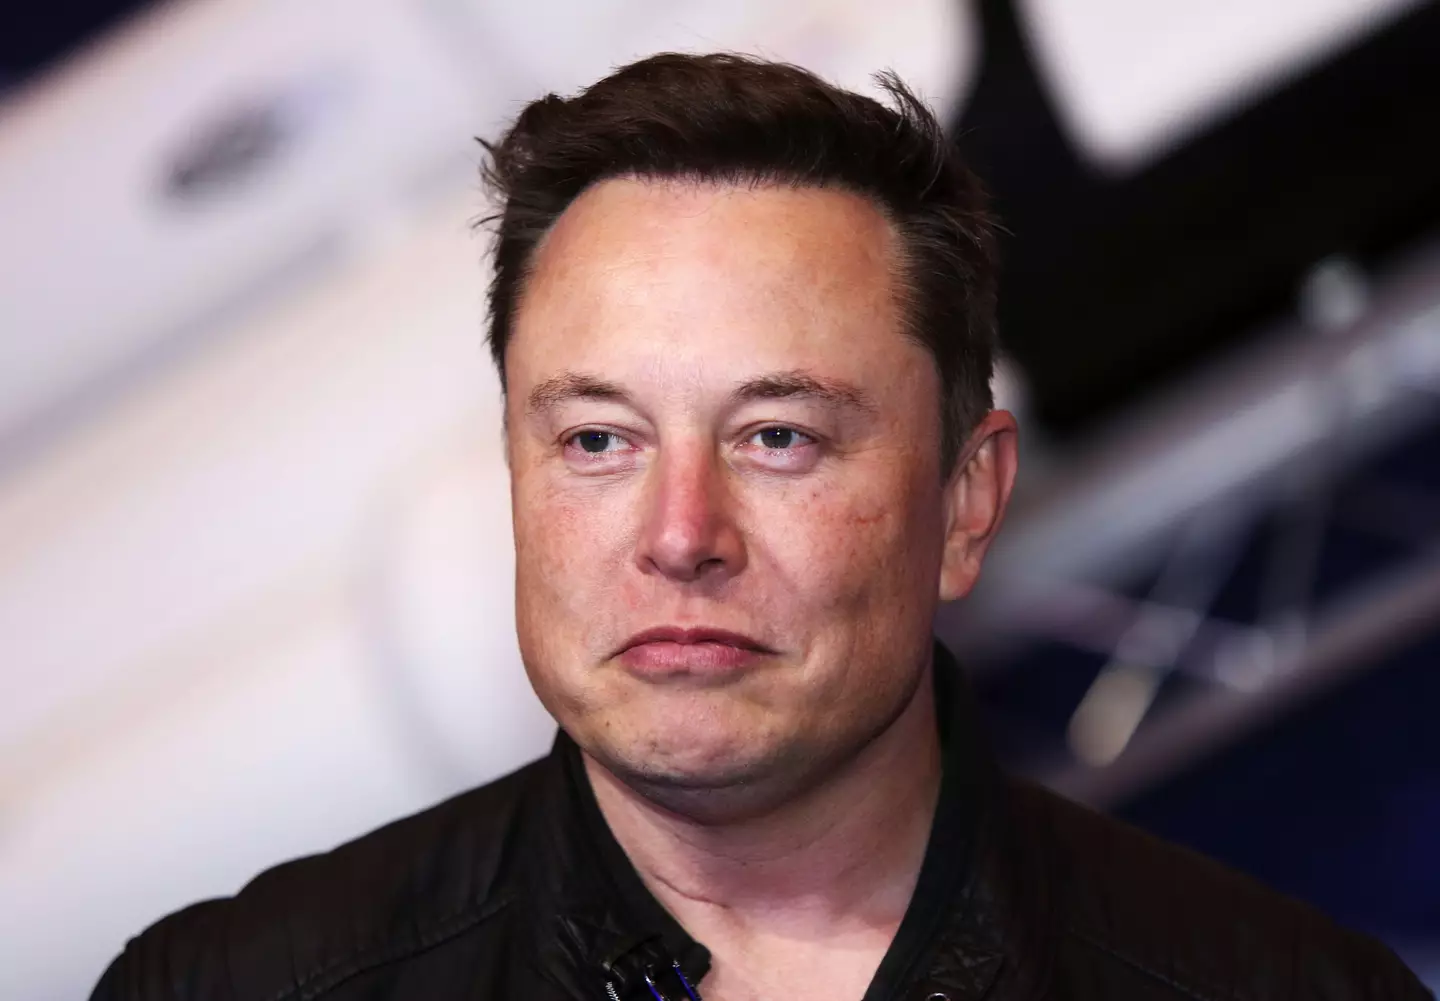 Elon Musk has left followers baffled yet again with a tweet of some 18th Century artwork.